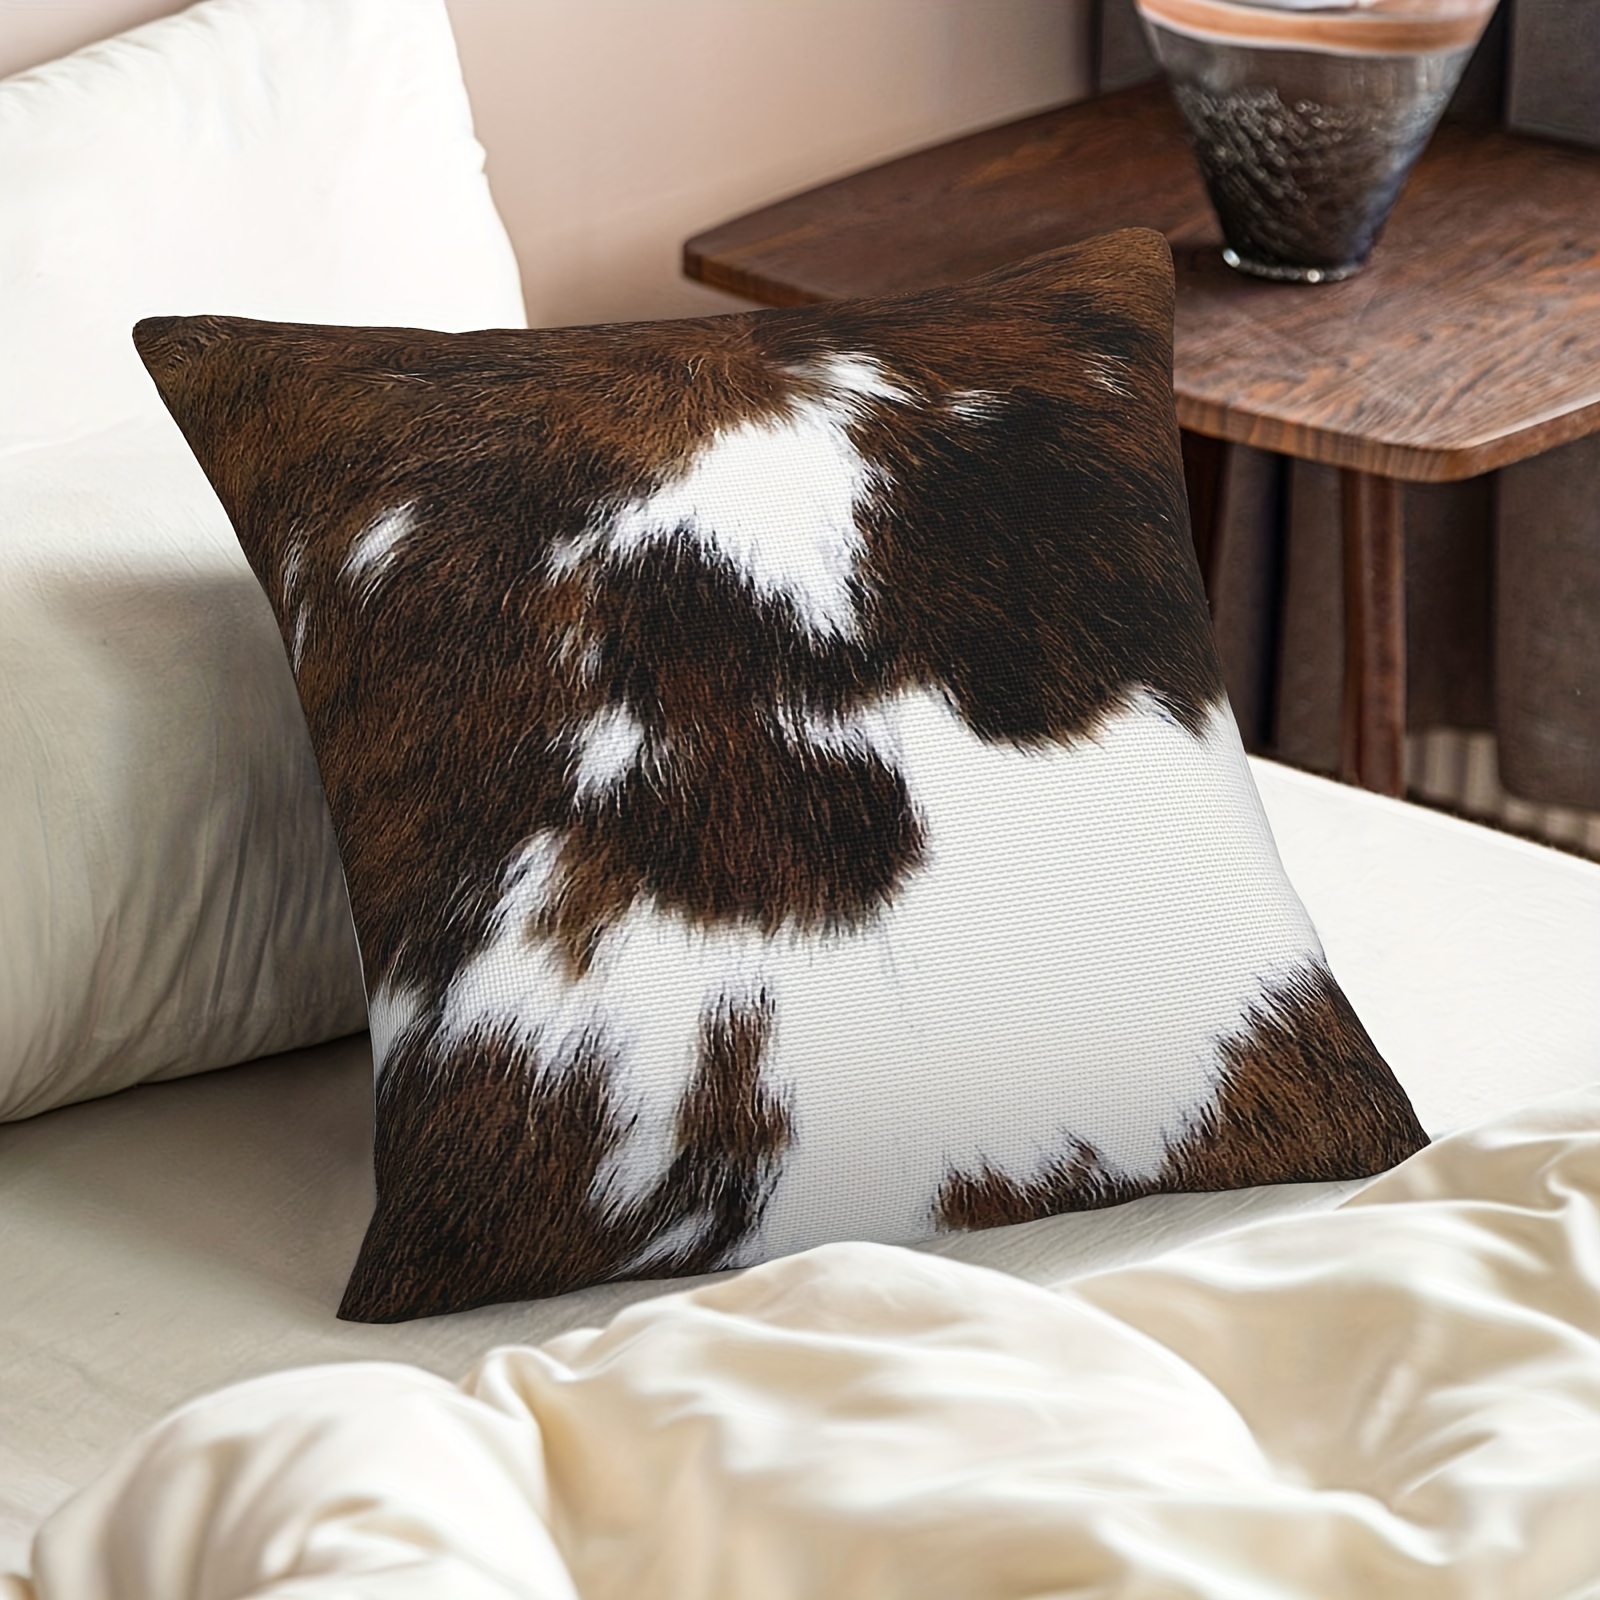  Cowhide Pillow Covers 16x16 Western Farm Animal Fur Cushion  Covers,Brown White Cow Print Throw Pillow Covers Bedroom Living Room  Decor,Wildlife Rustic Farmhouse Cow Decorative Pillow Covers : Home &  Kitchen